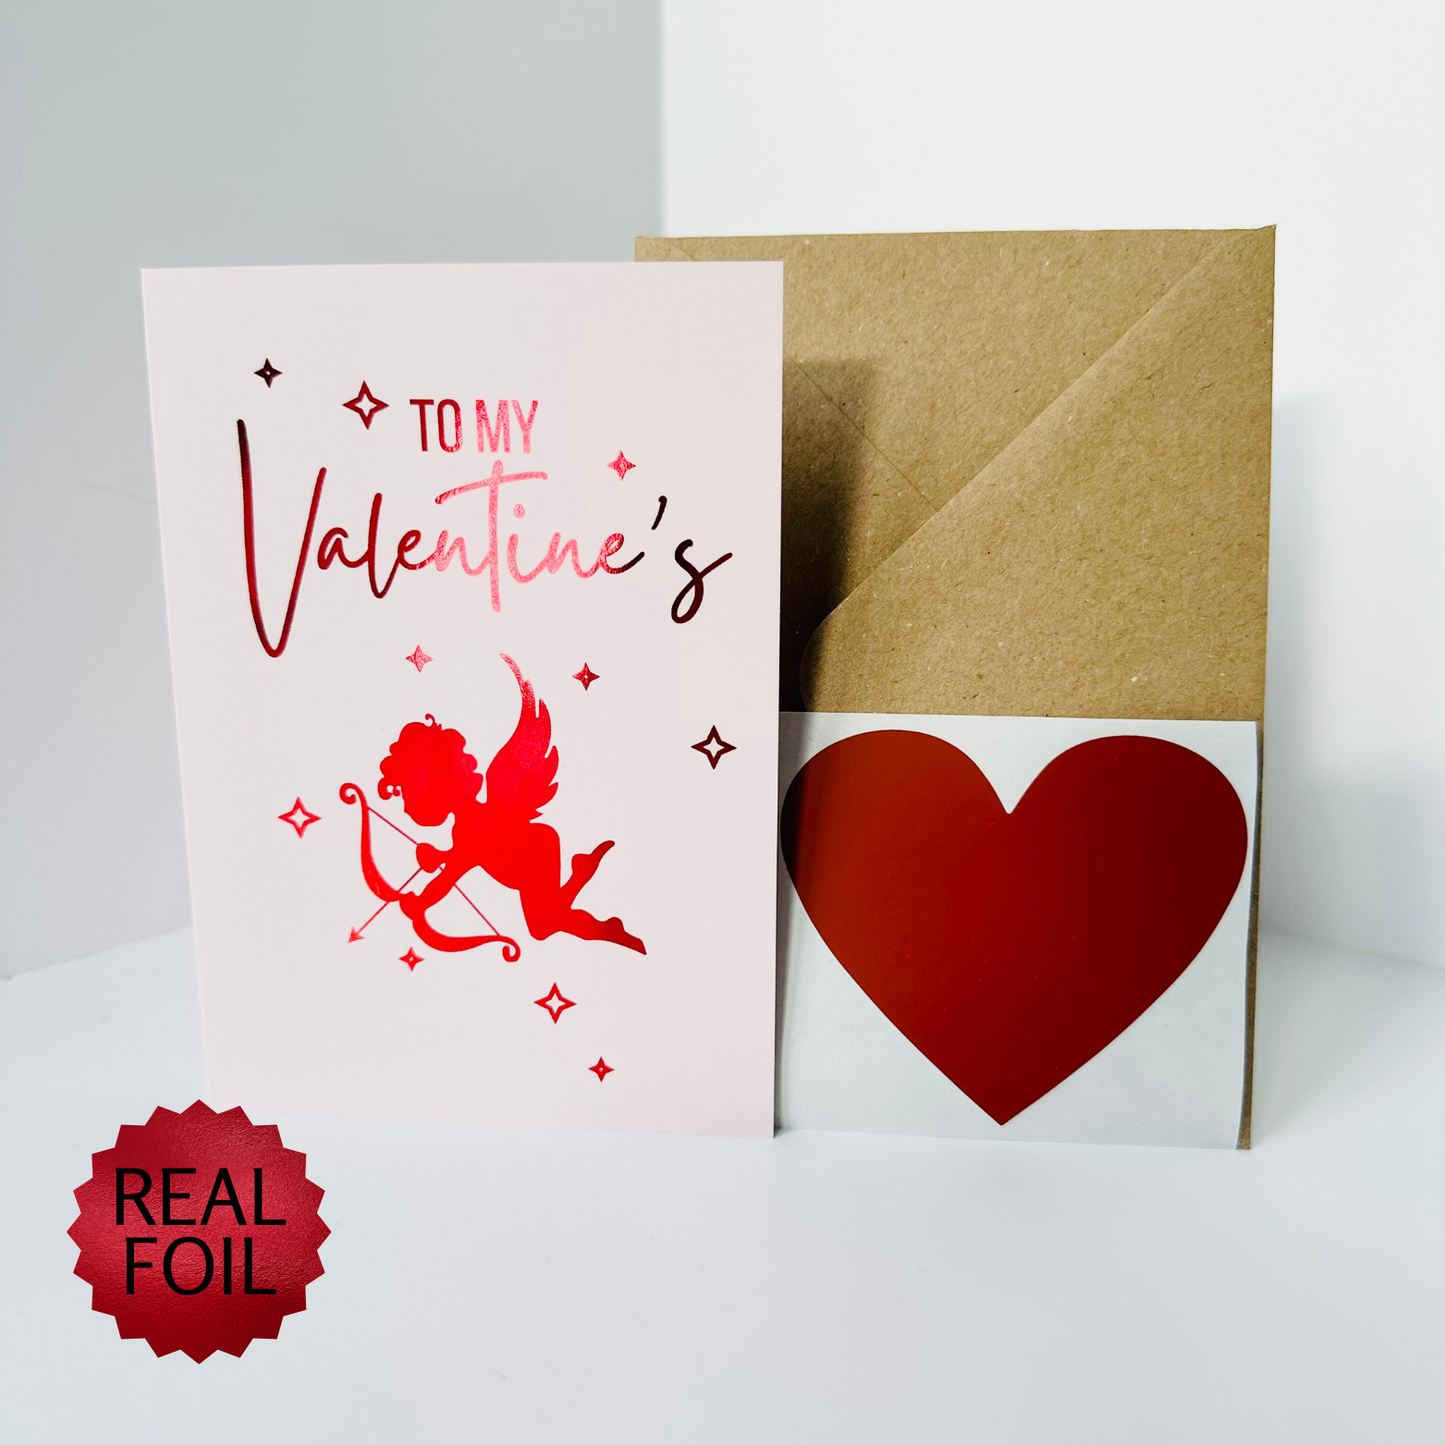 Valentine's Red Foiled DIY Scratch Reveal Card - Red Cupid